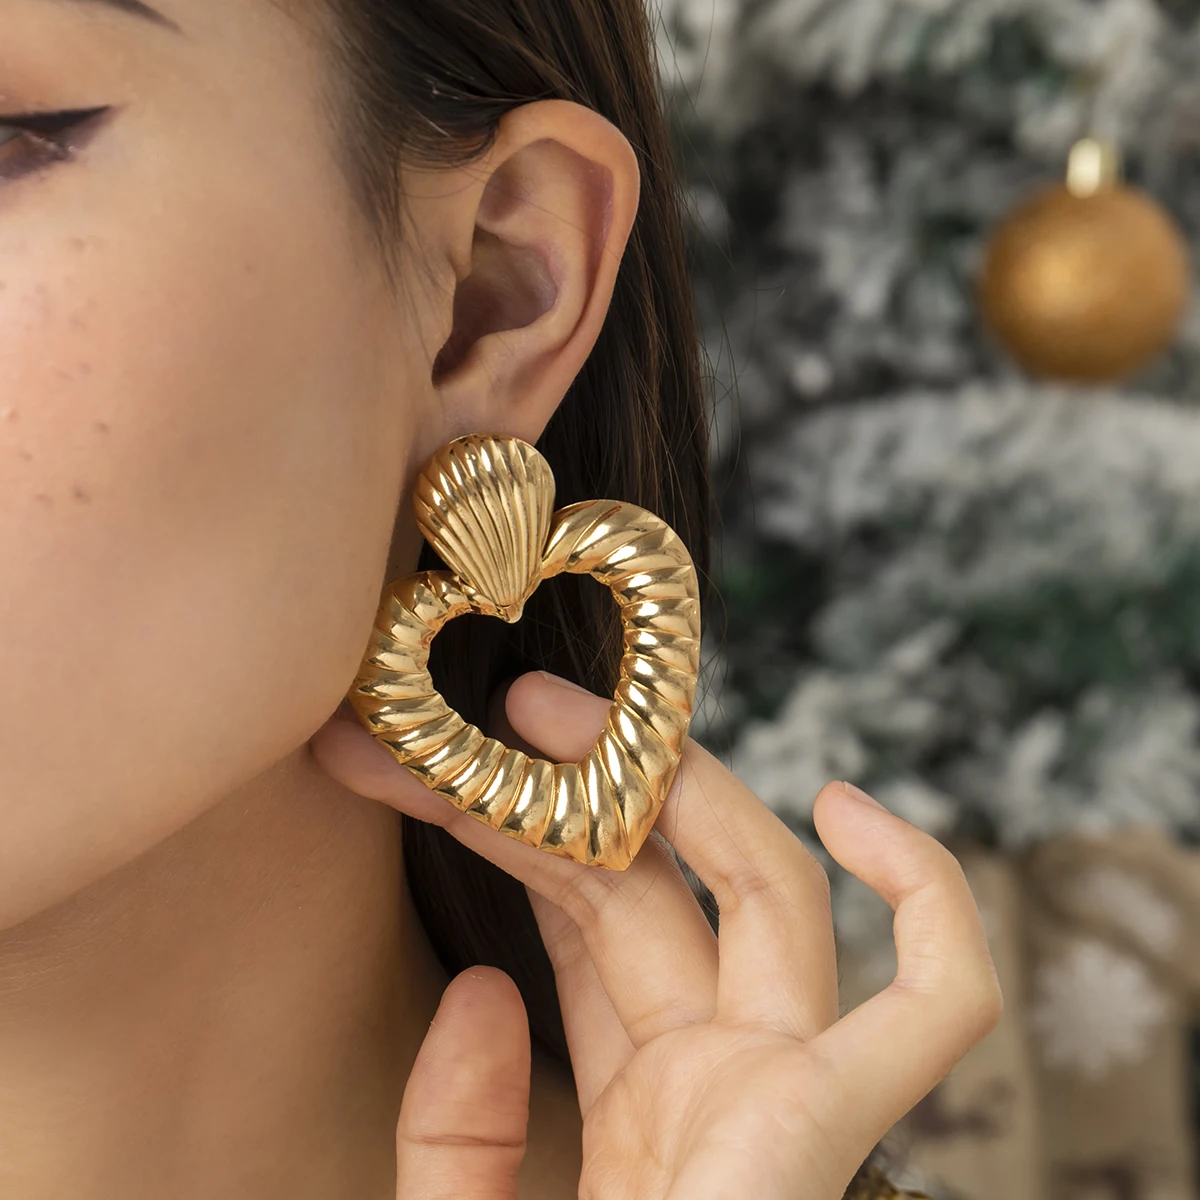 

IngeSight.Z Punk Exaggerated Hollow Out Big Love Heart Earrings For Women Vintage Metal Gold Color Geometric Hoop Earrings Gift